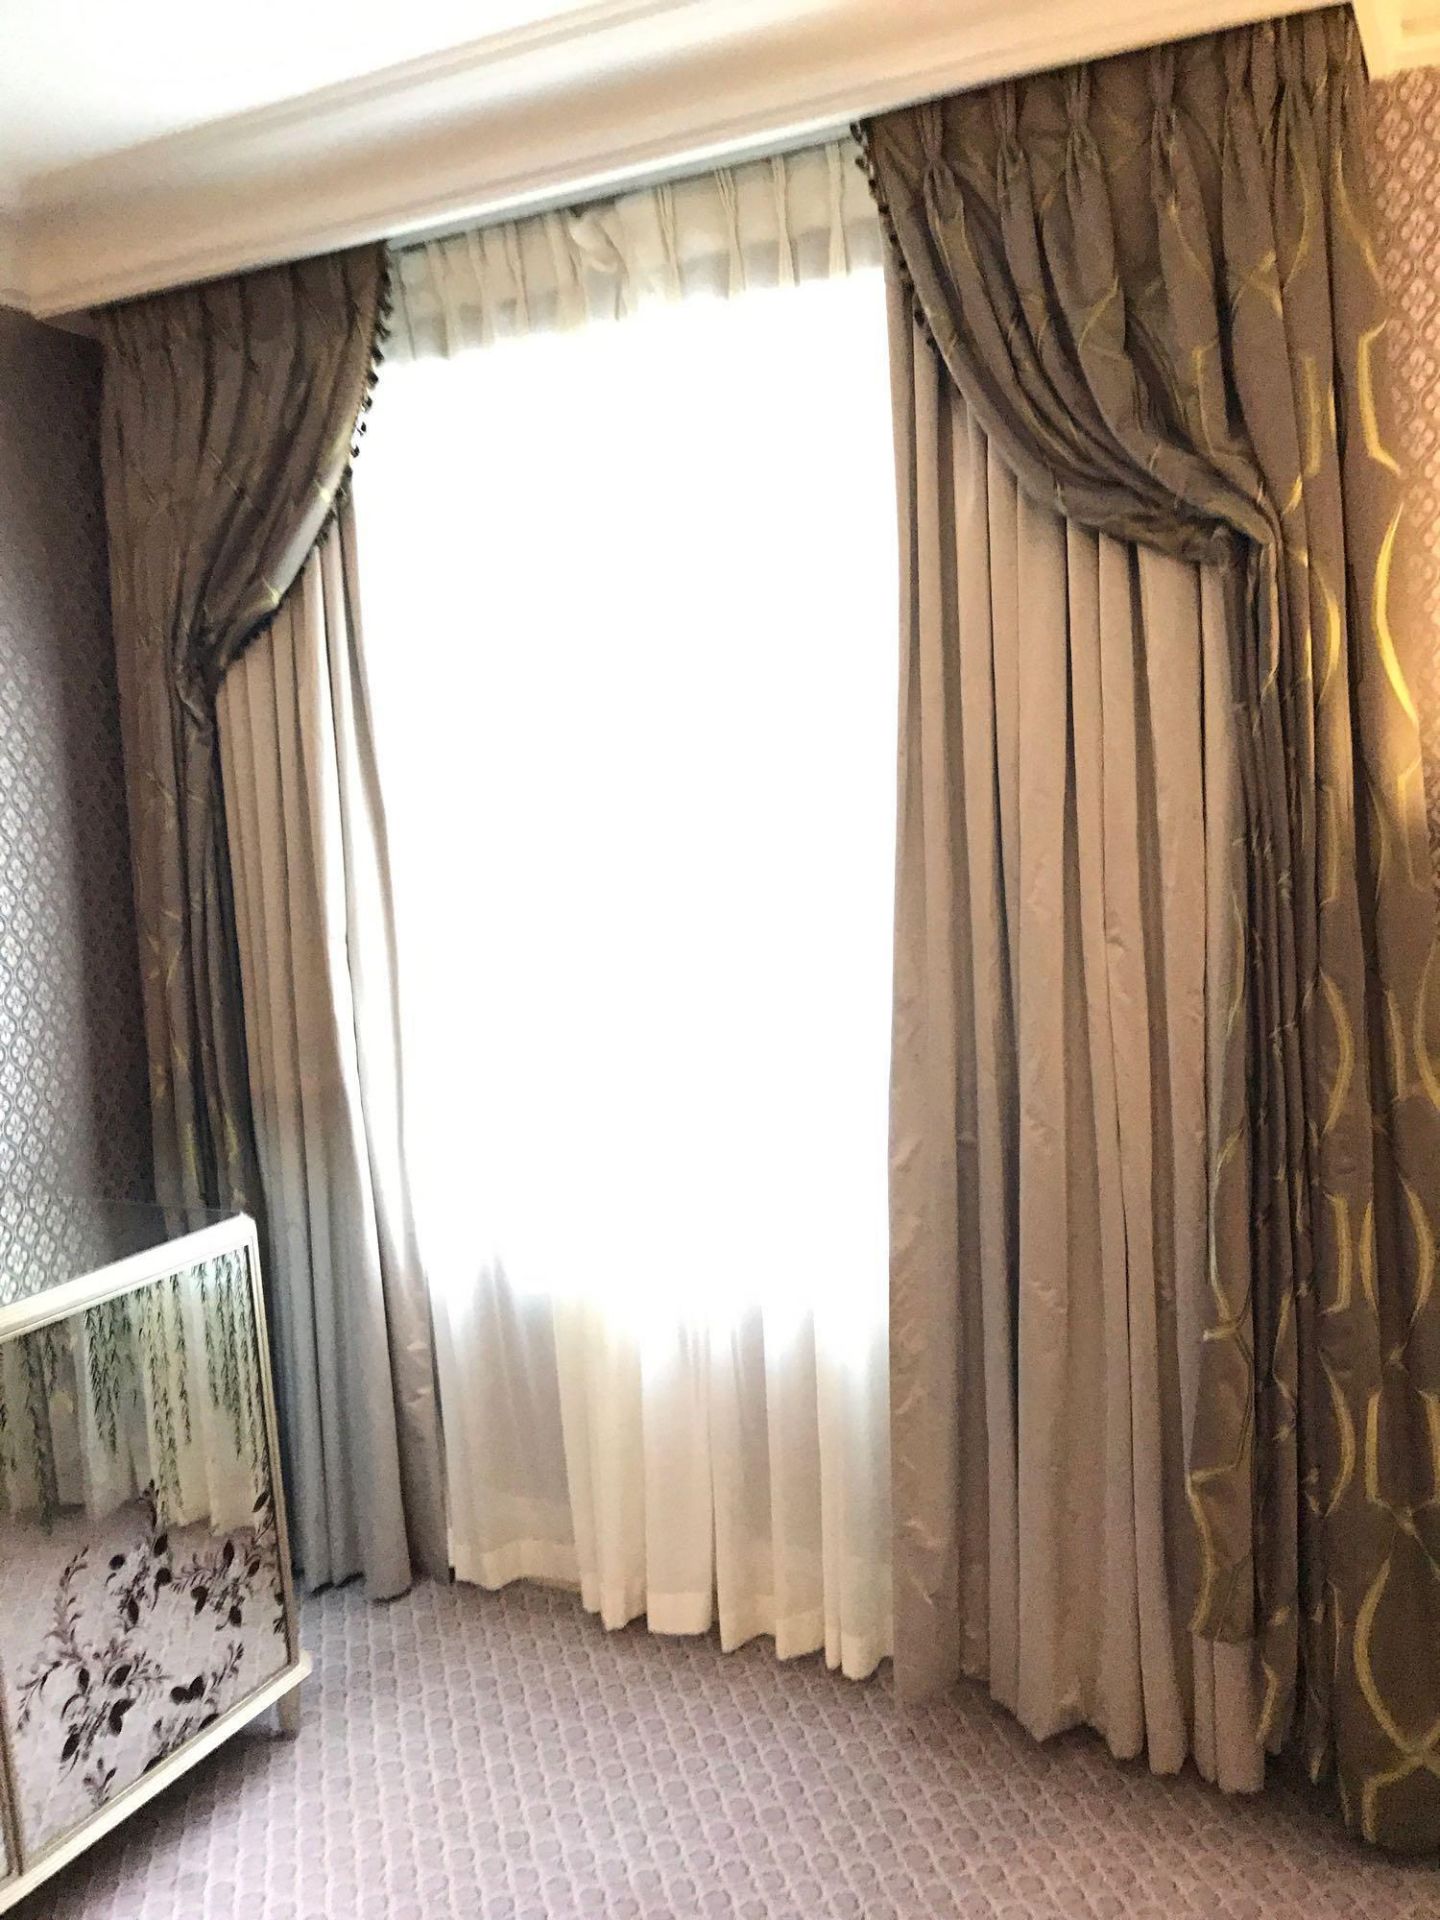 2 x Pair Of Gold And Silver Silk Drapes And Jabots With Tie Backs Span 255 x 300cm Room 629